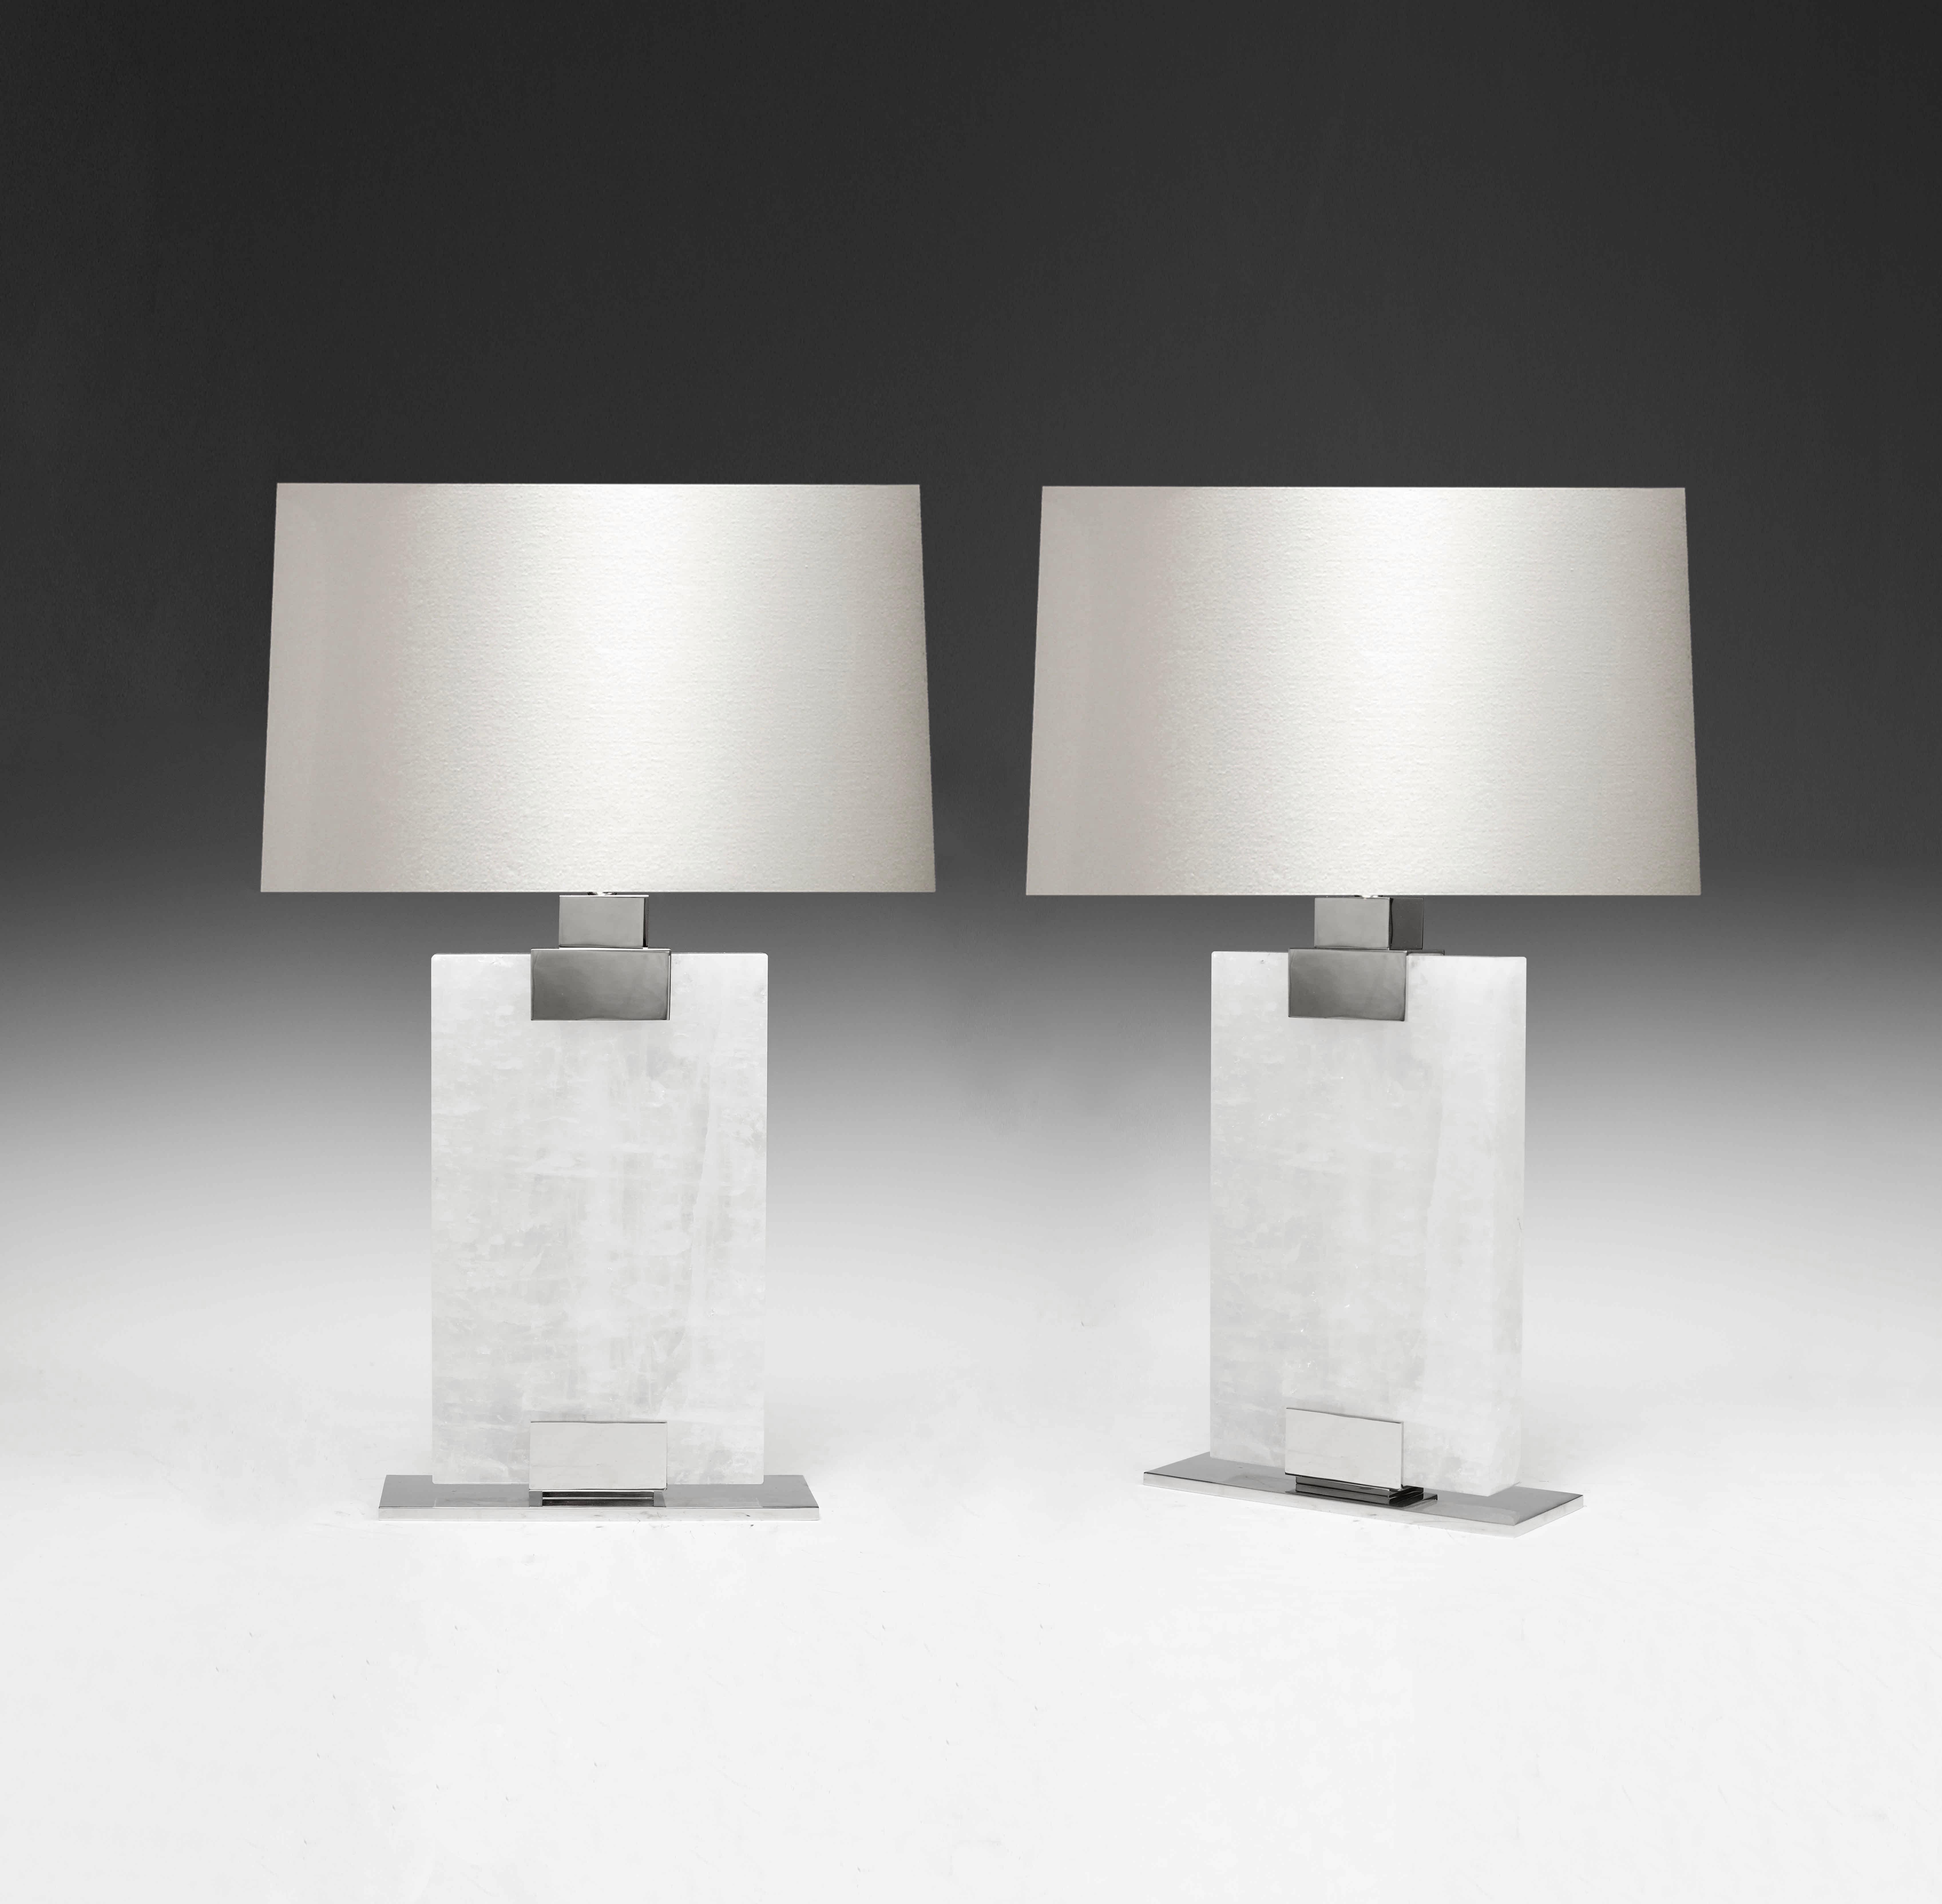 Pair of rectangular block form rock crystal lamps with nickel plating decoration.
Each lamp installs two sockets.
Lampshade do not include.
To the top of the rock crystal 12in/H.